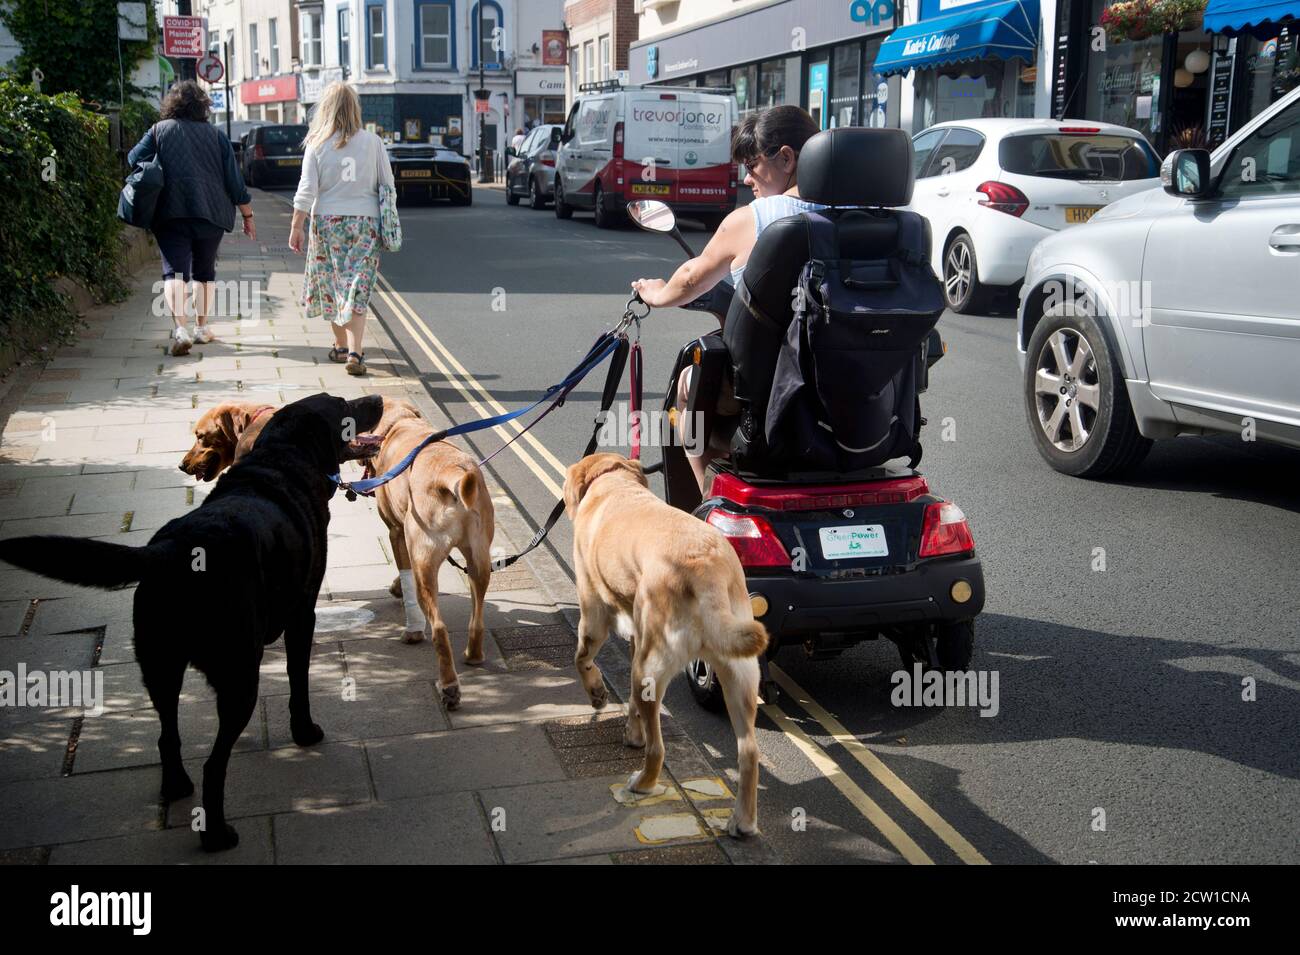 Isle of Wight September 2020. Sandown. Women driving a mobility scooter and walking her dogs